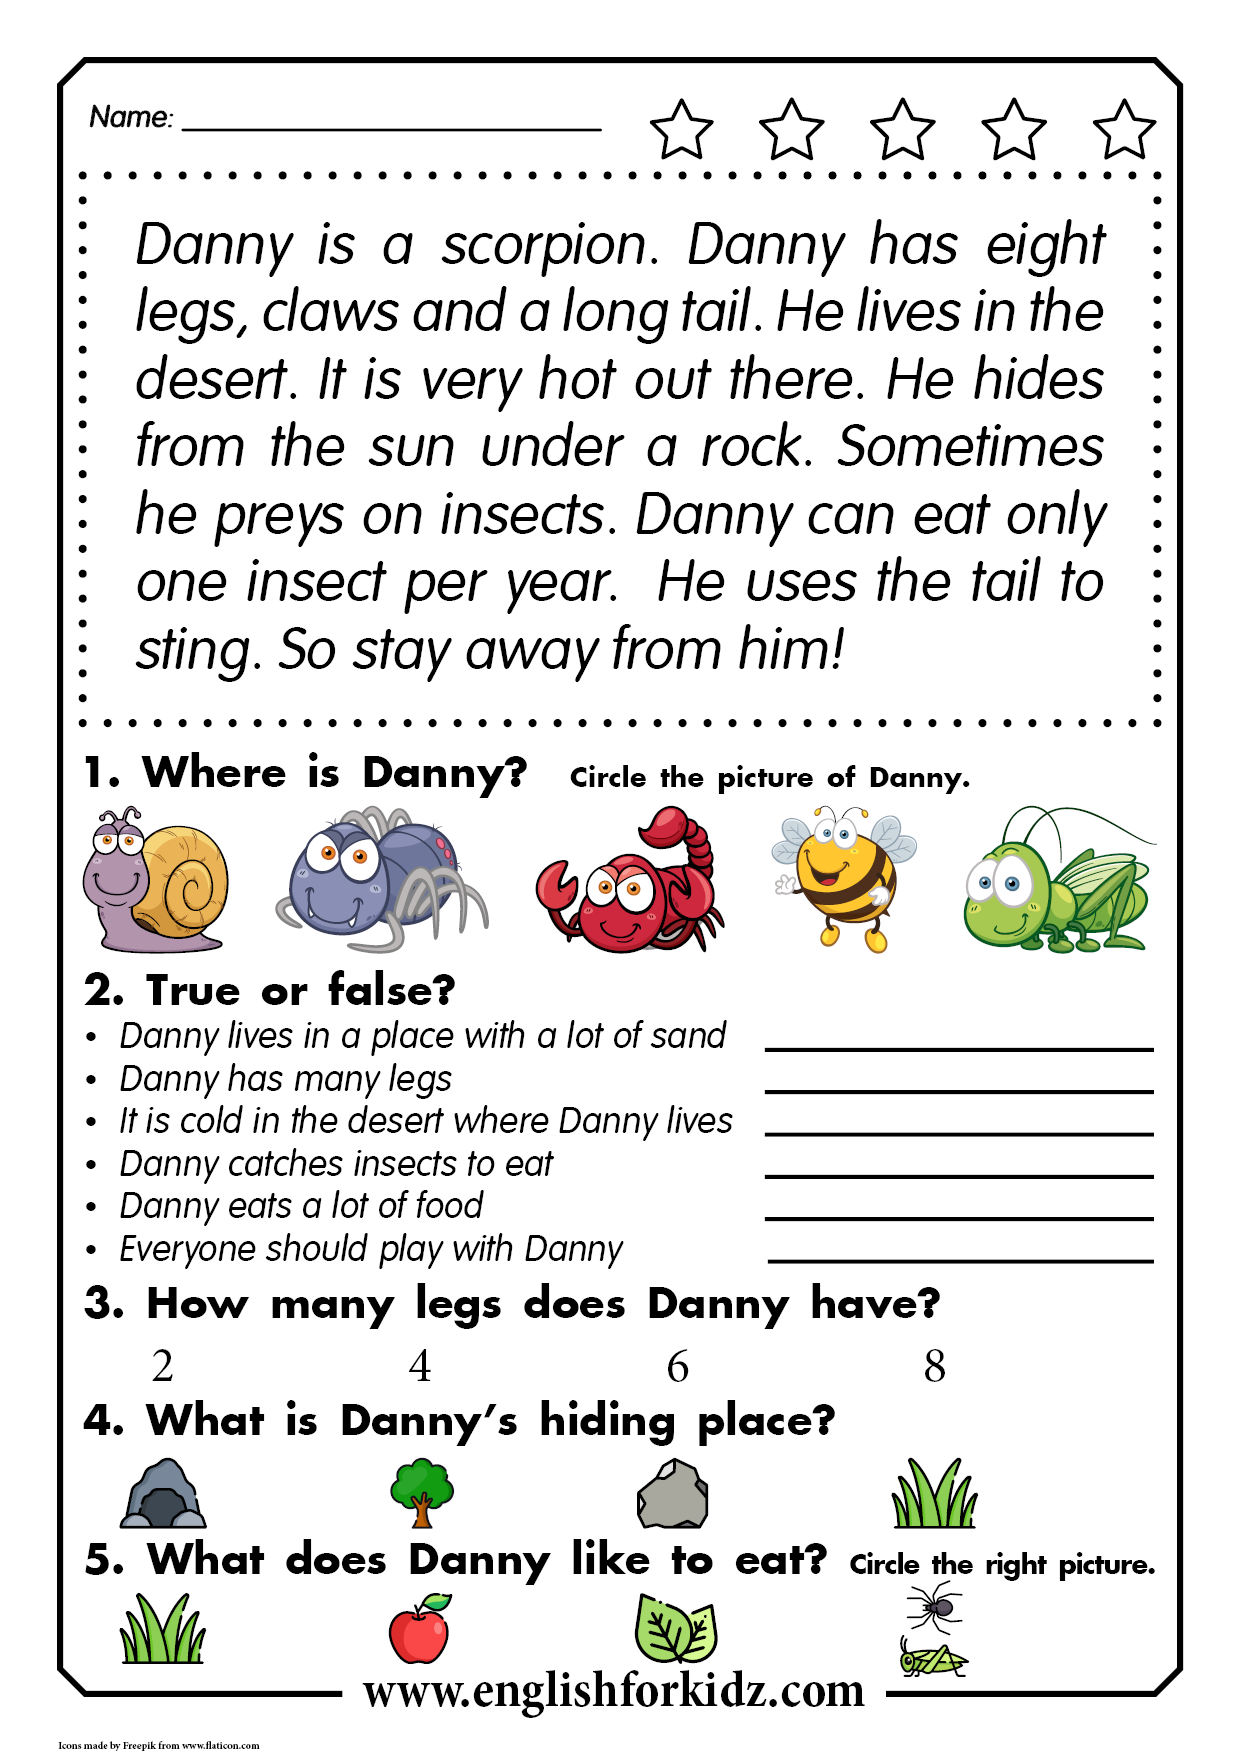 Reading Comprehension Passage For Kids Learning English In Elementary 